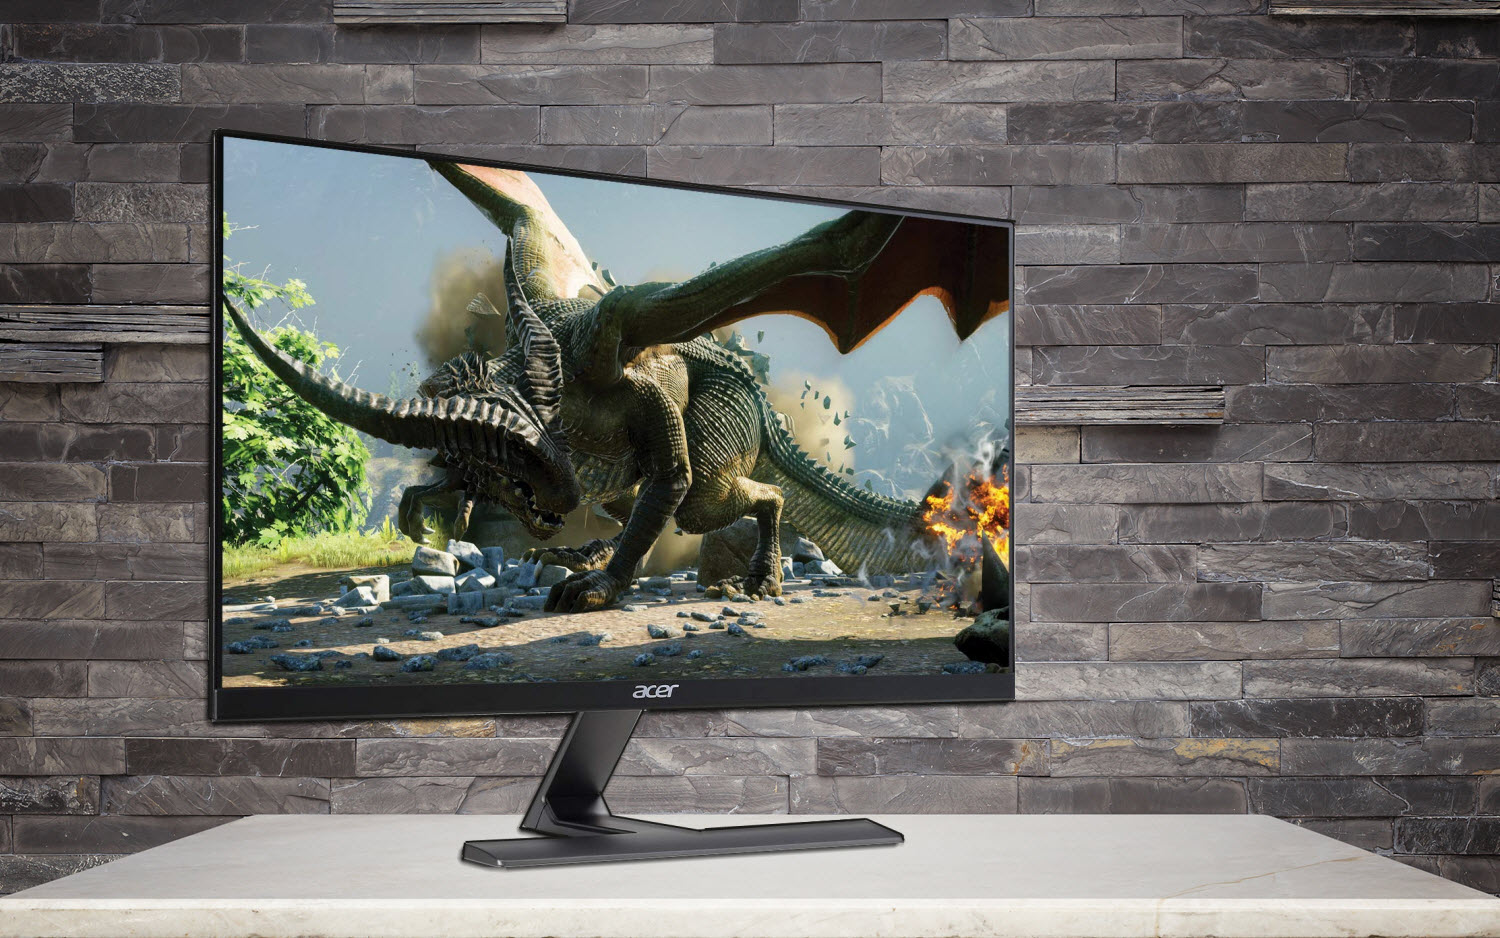 Acer RG270 Gaming Monitor Review: Color Accuracy at a Budget Price